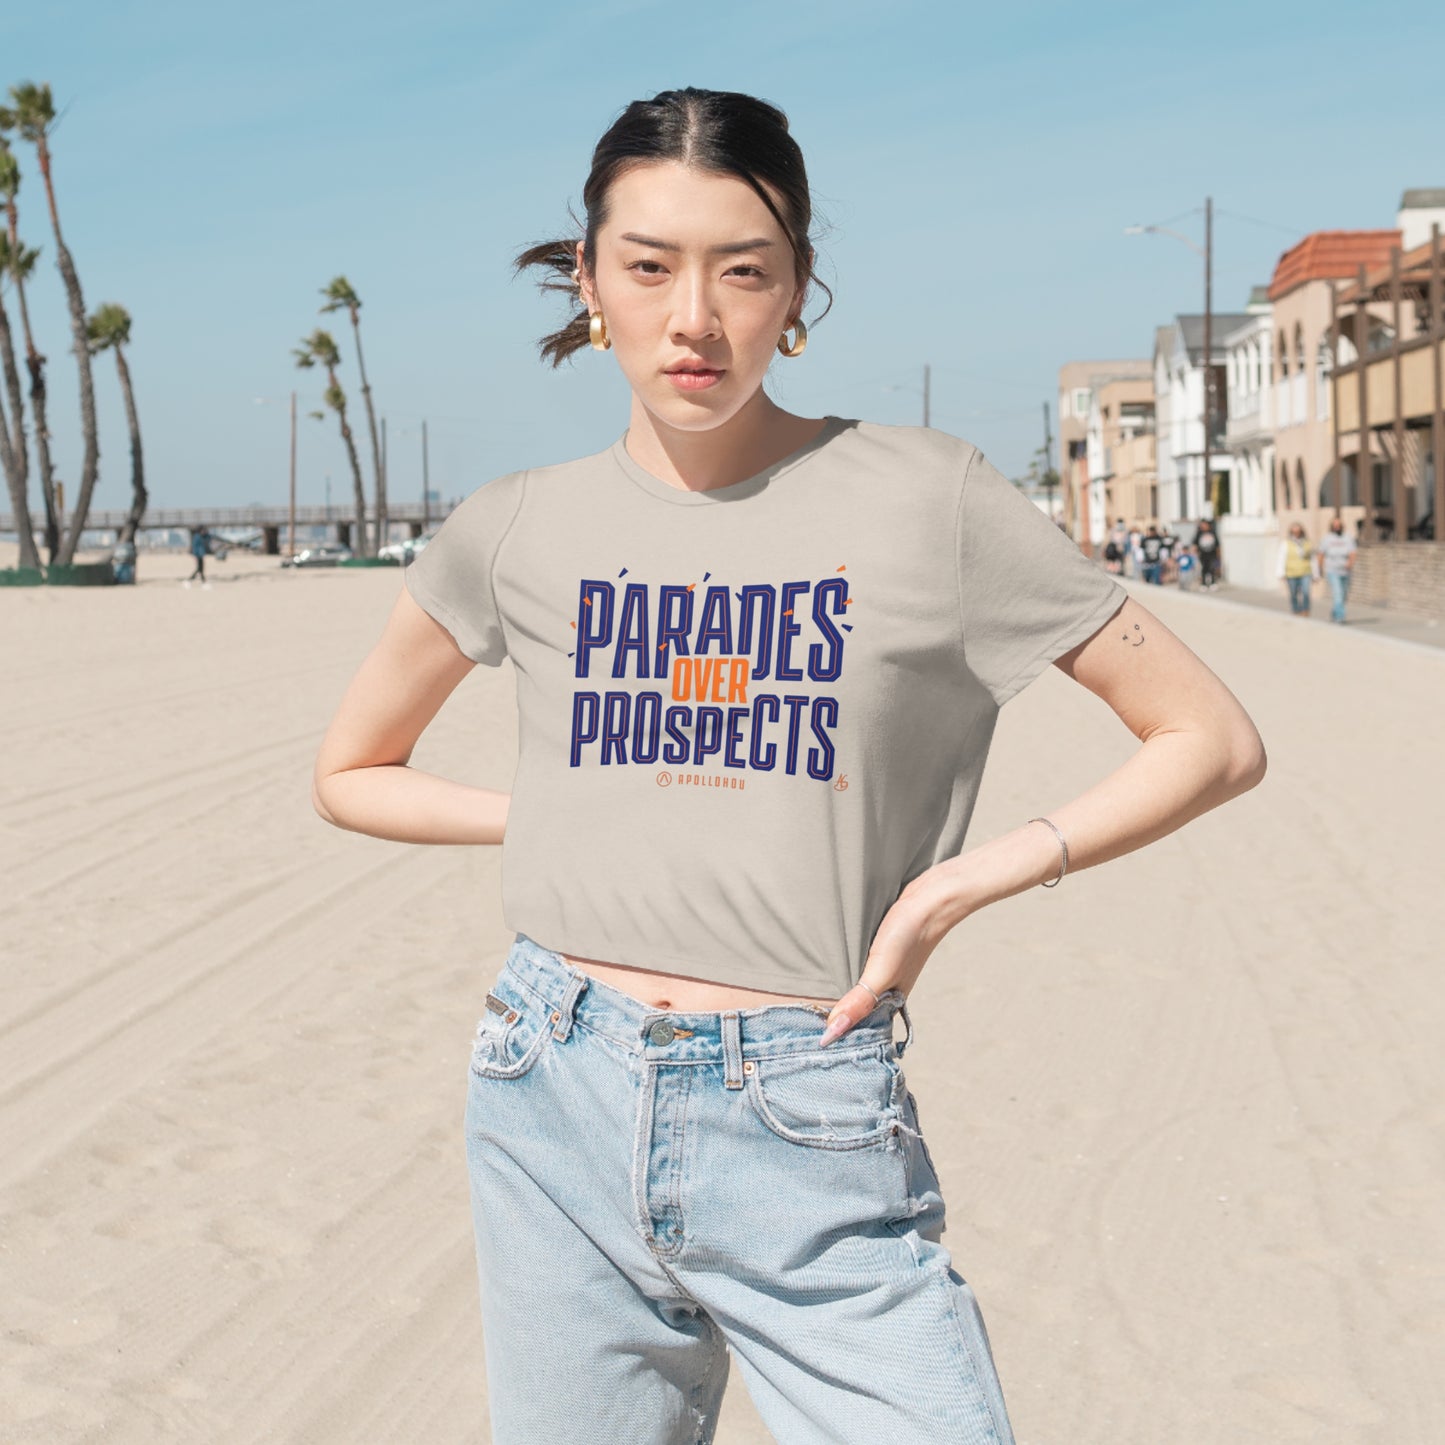 Parades Over Prospects Cropped Tee